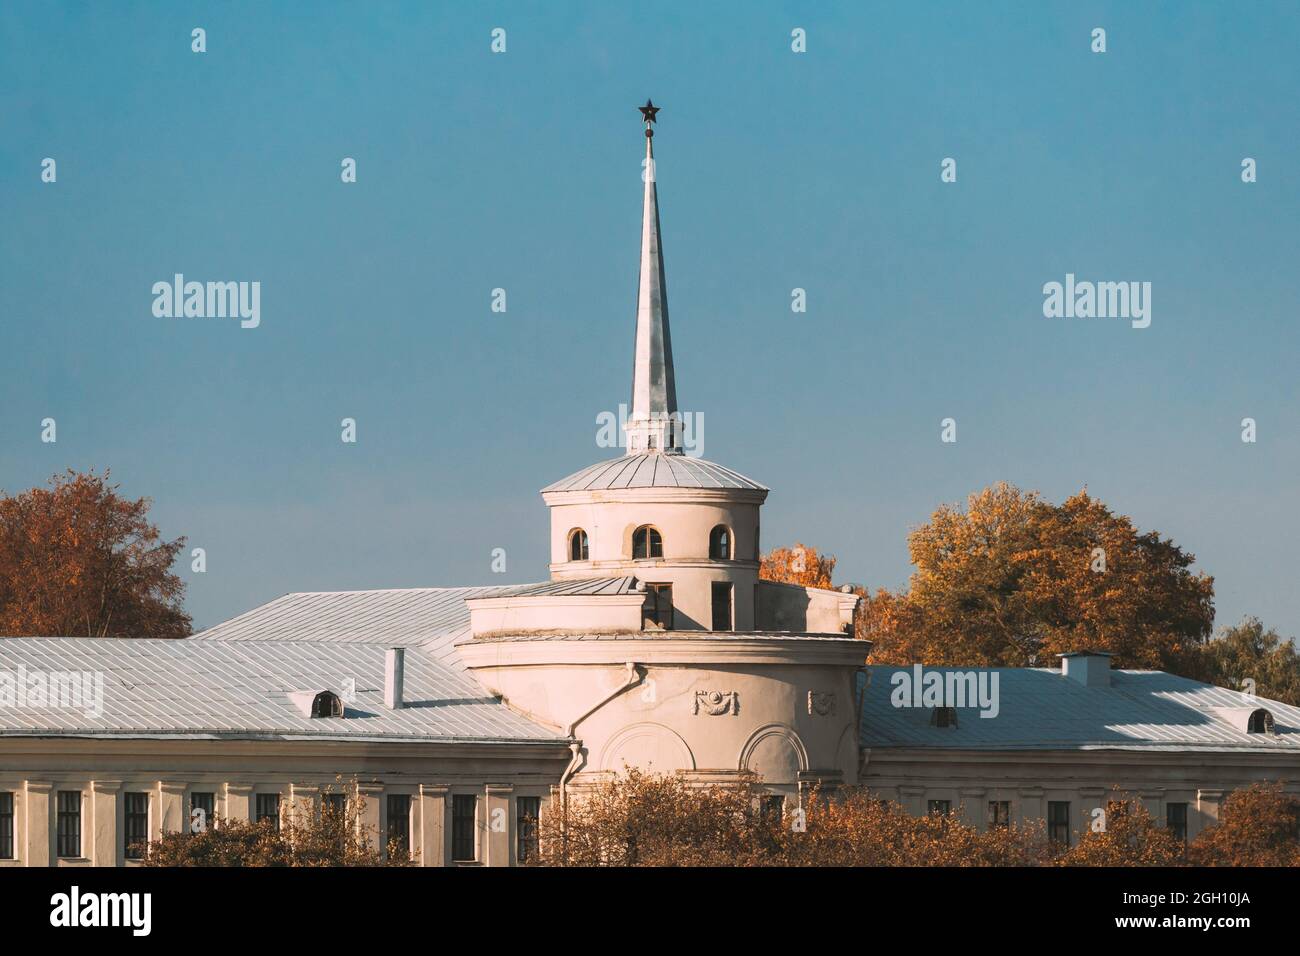 Grodno, Belarus. View Of New Hrodna Castle In Summer Day. Royal Palace Of Augustus Iii Of Poland And Stanislaw August Poniatowski Where Famous Grodno Stock Photo